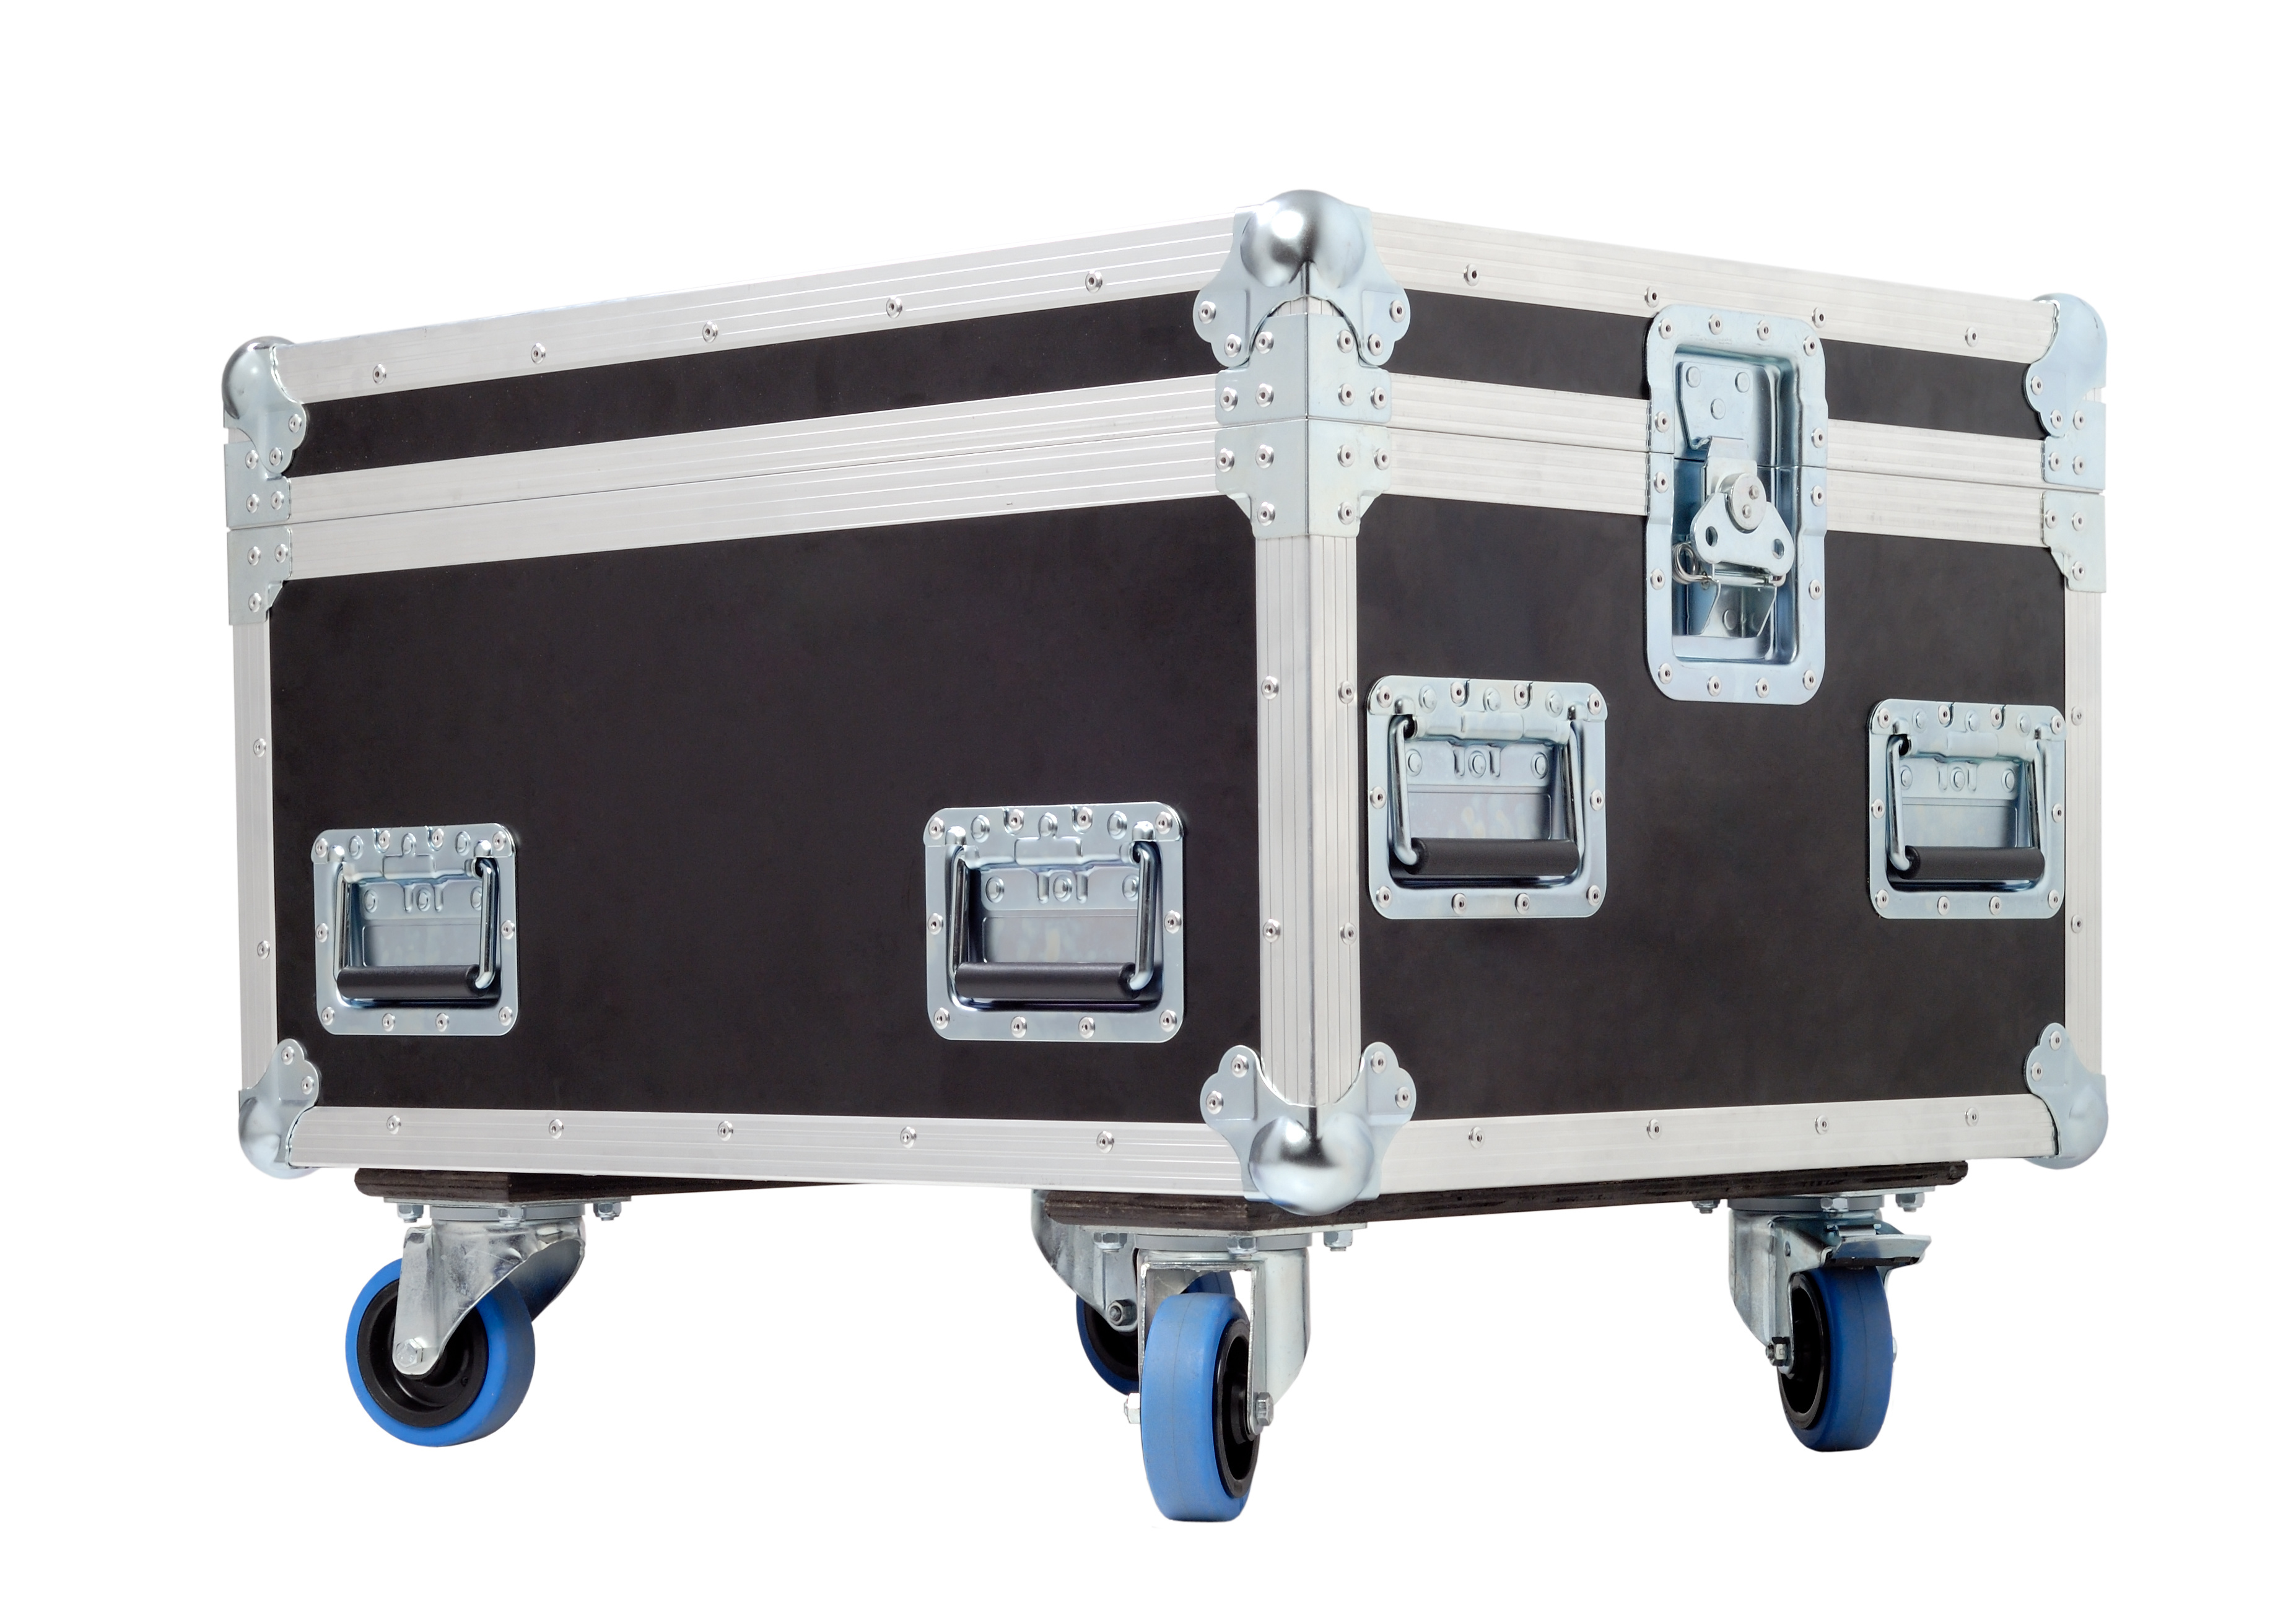 Metallic rivets of a road case (for transporting music and lightning equipment)